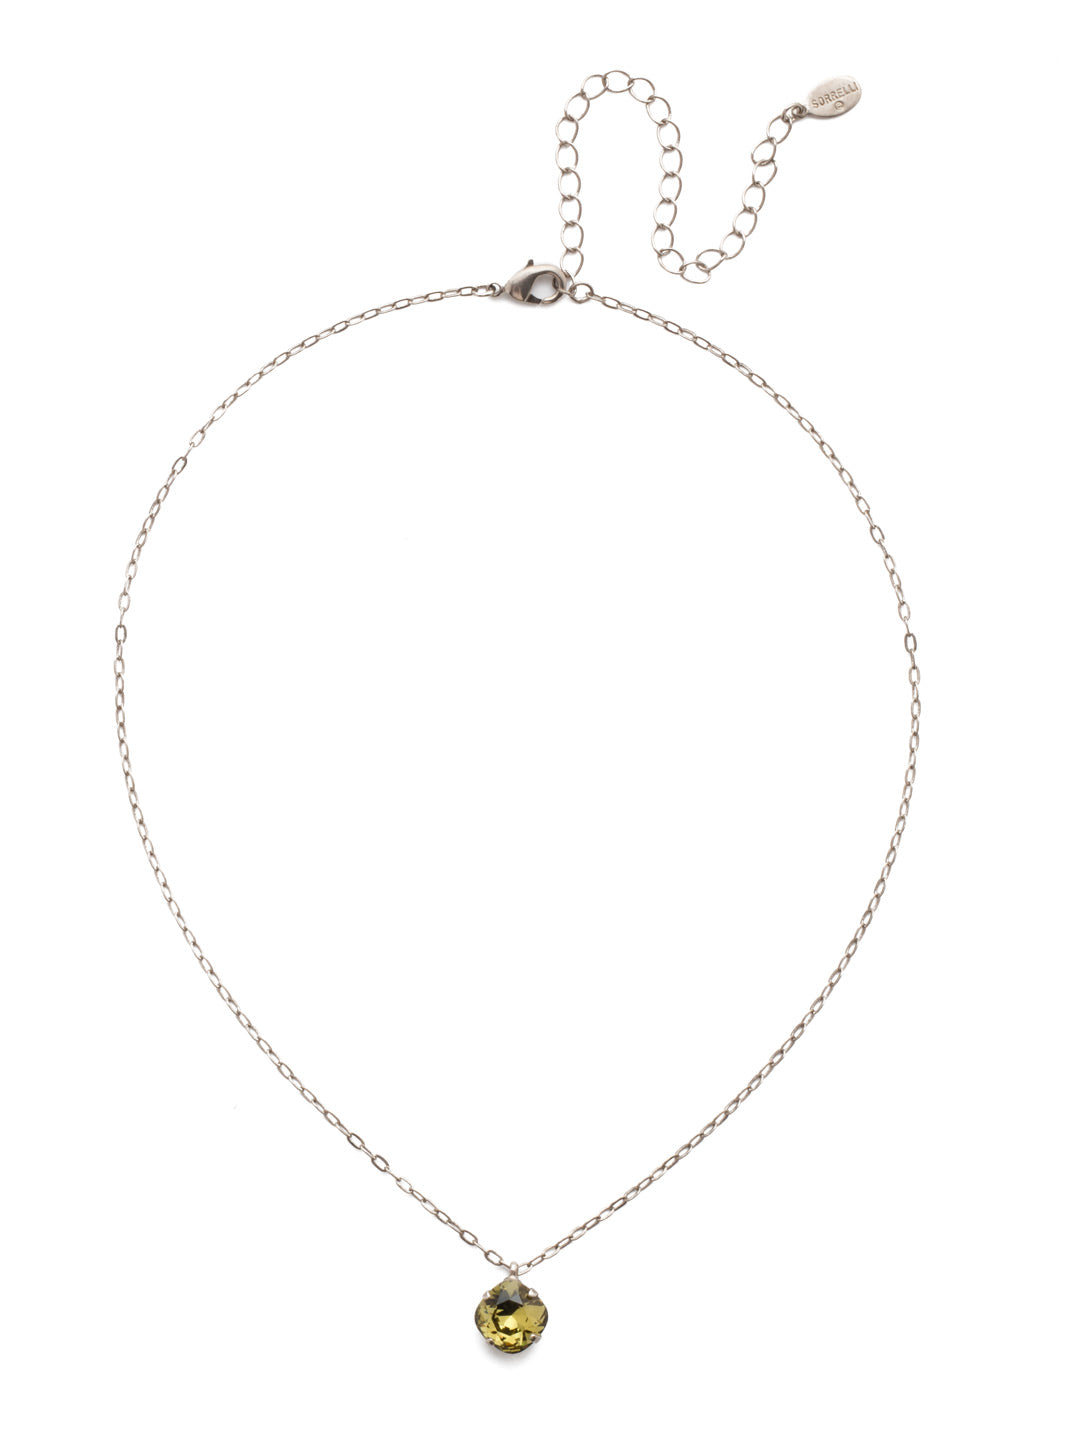 Siren Pendant Necklace - NEP22ASKH - With a cushion-cut crystal and delicate chain, the Siren Pendant  will add a litle sparkle to your everyday look. From Sorrelli's Khaki collection in our Antique Silver-tone finish.